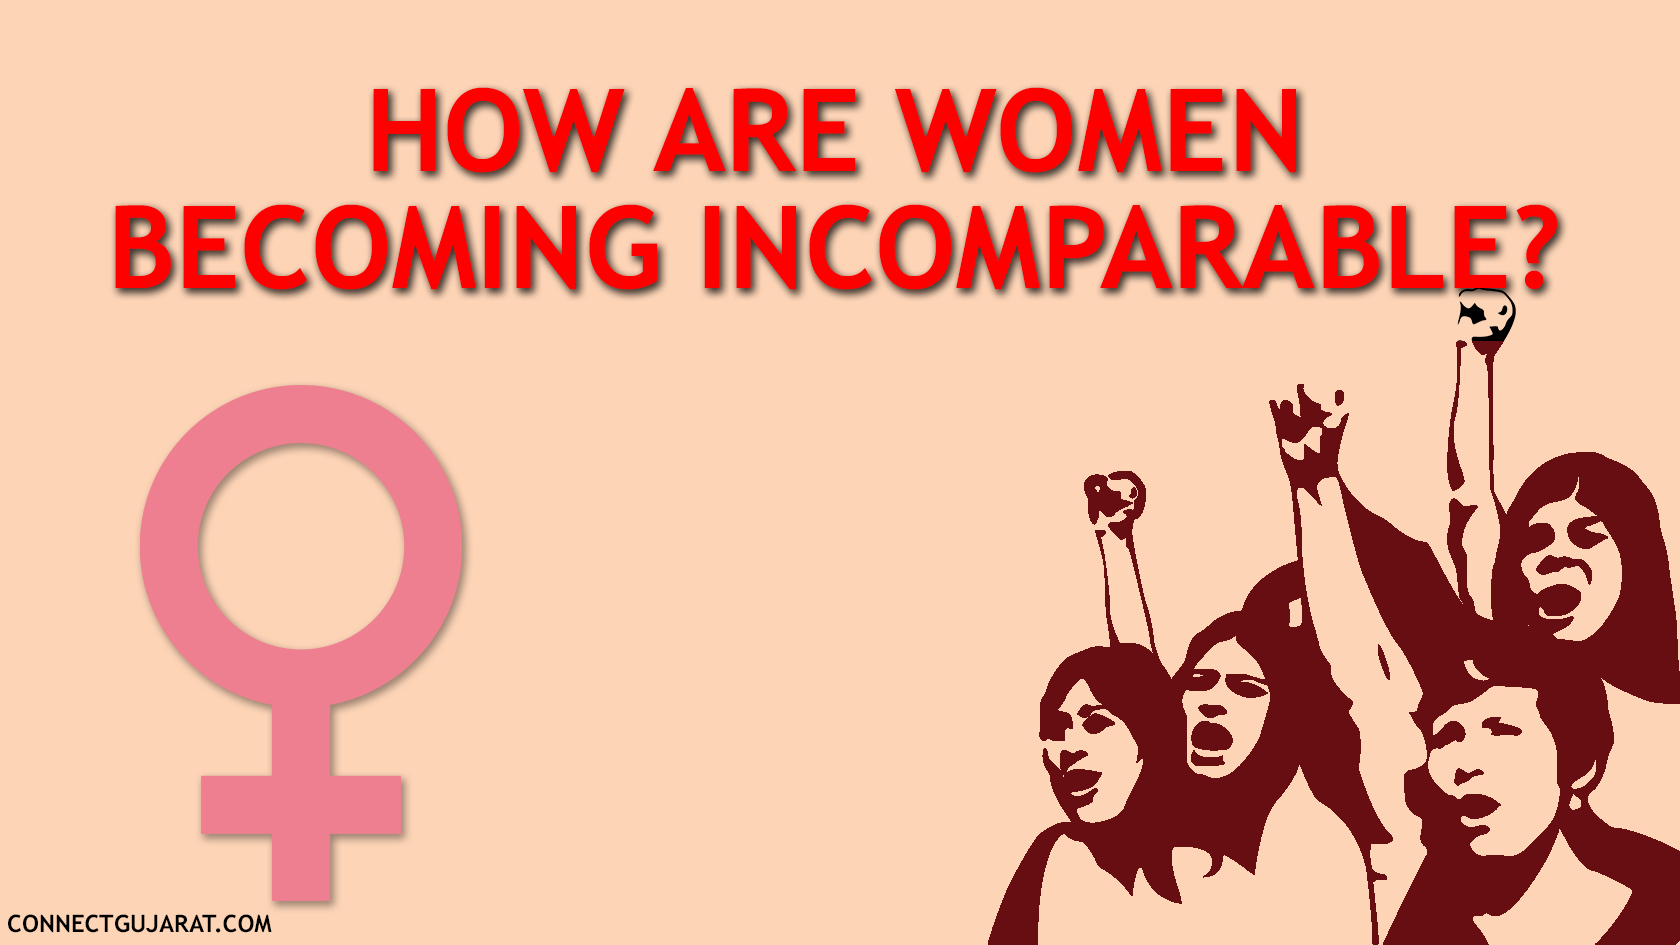 How are women becoming incomparable?